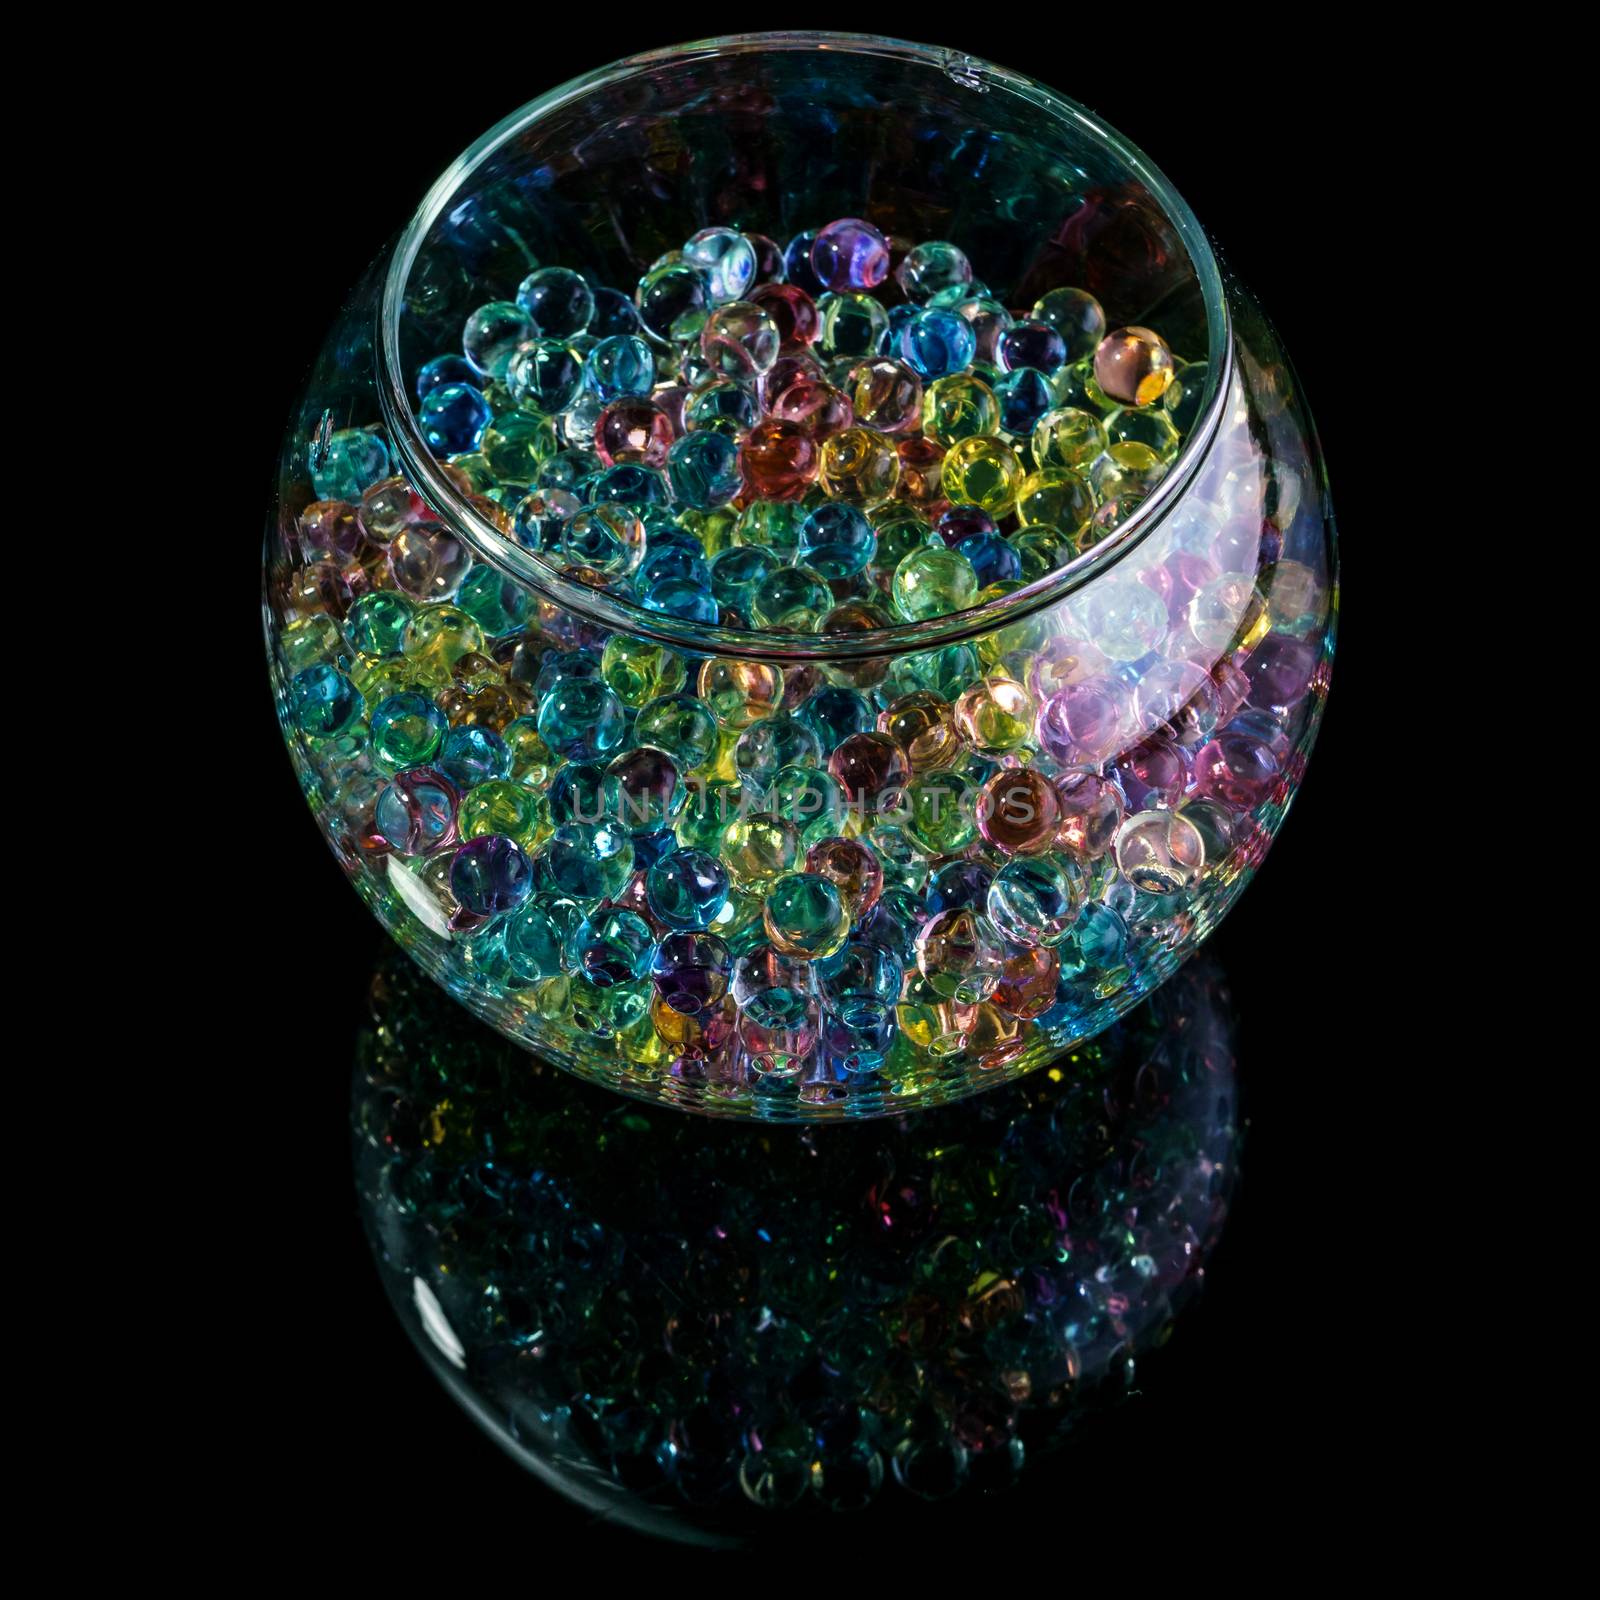 Colored hydrogel balls in a glass vase on a black background